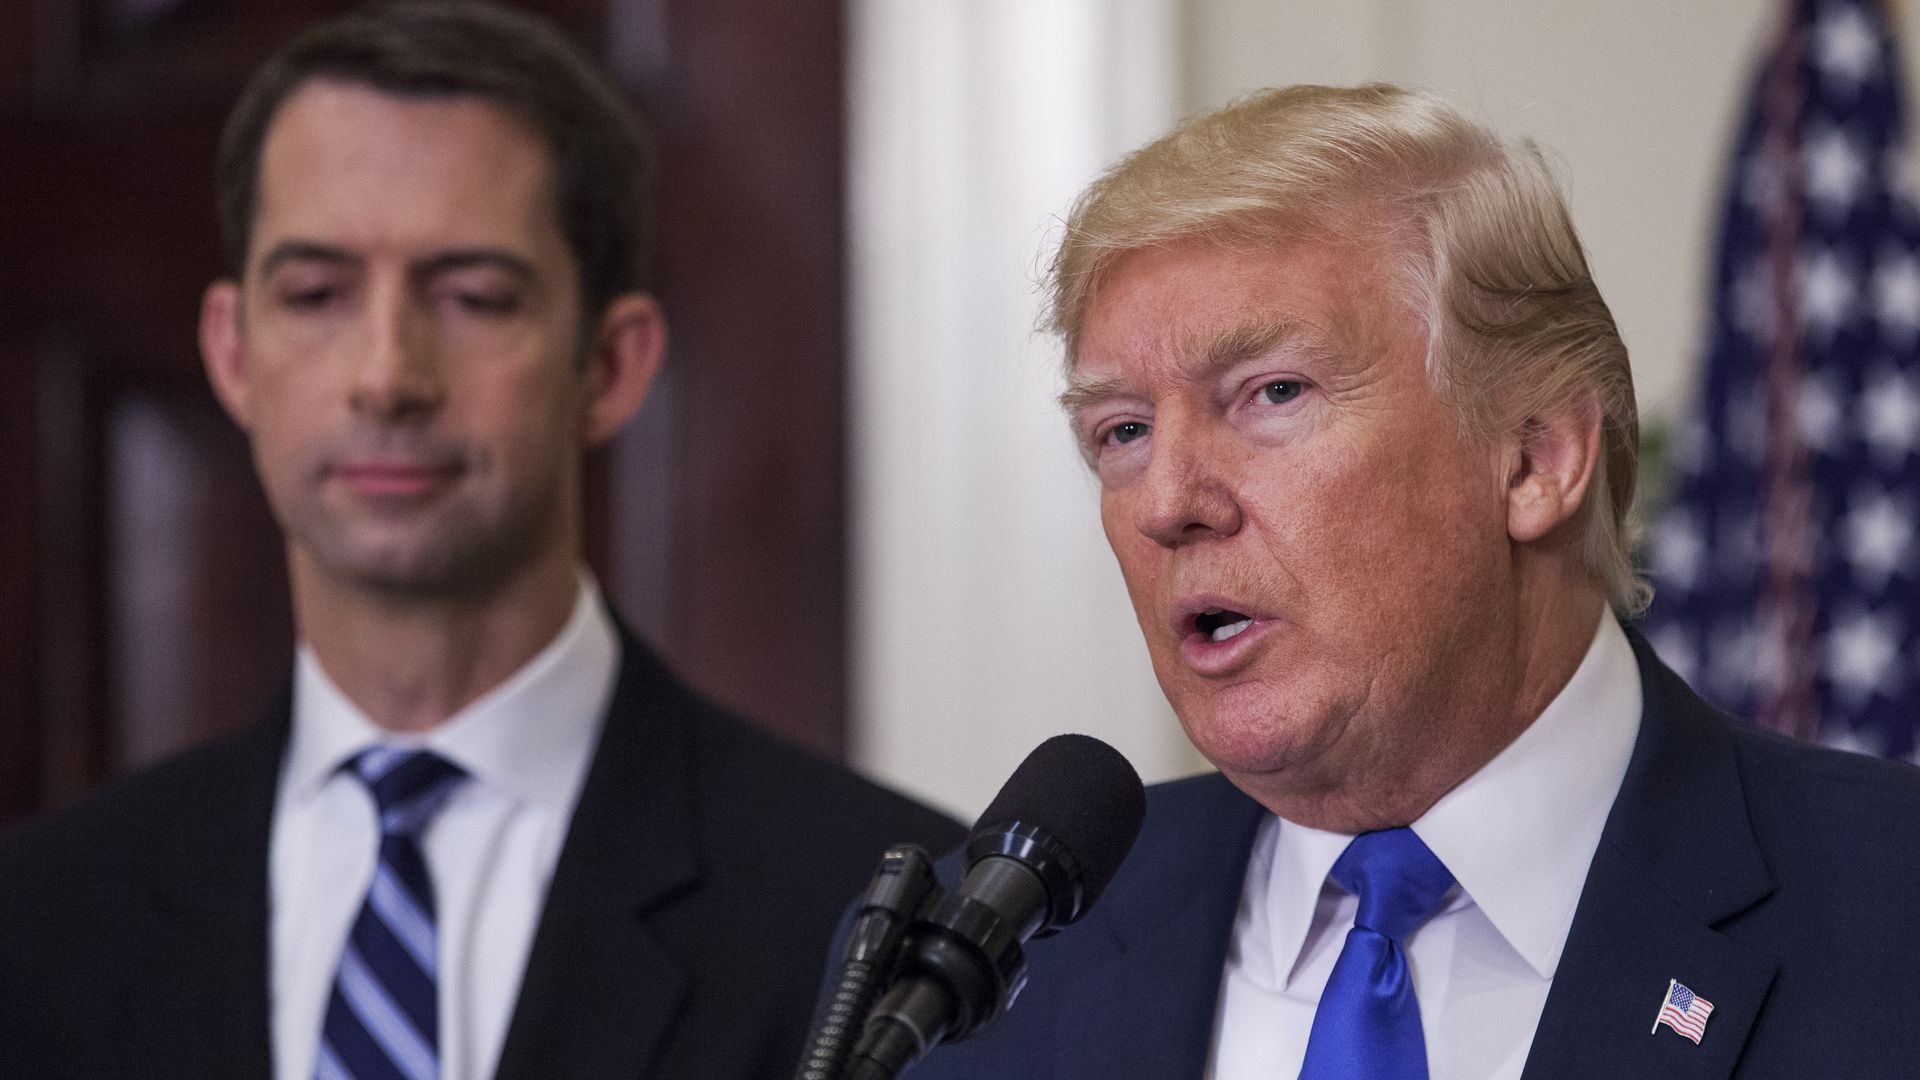 Trump and Tom Cotton stand in suits 